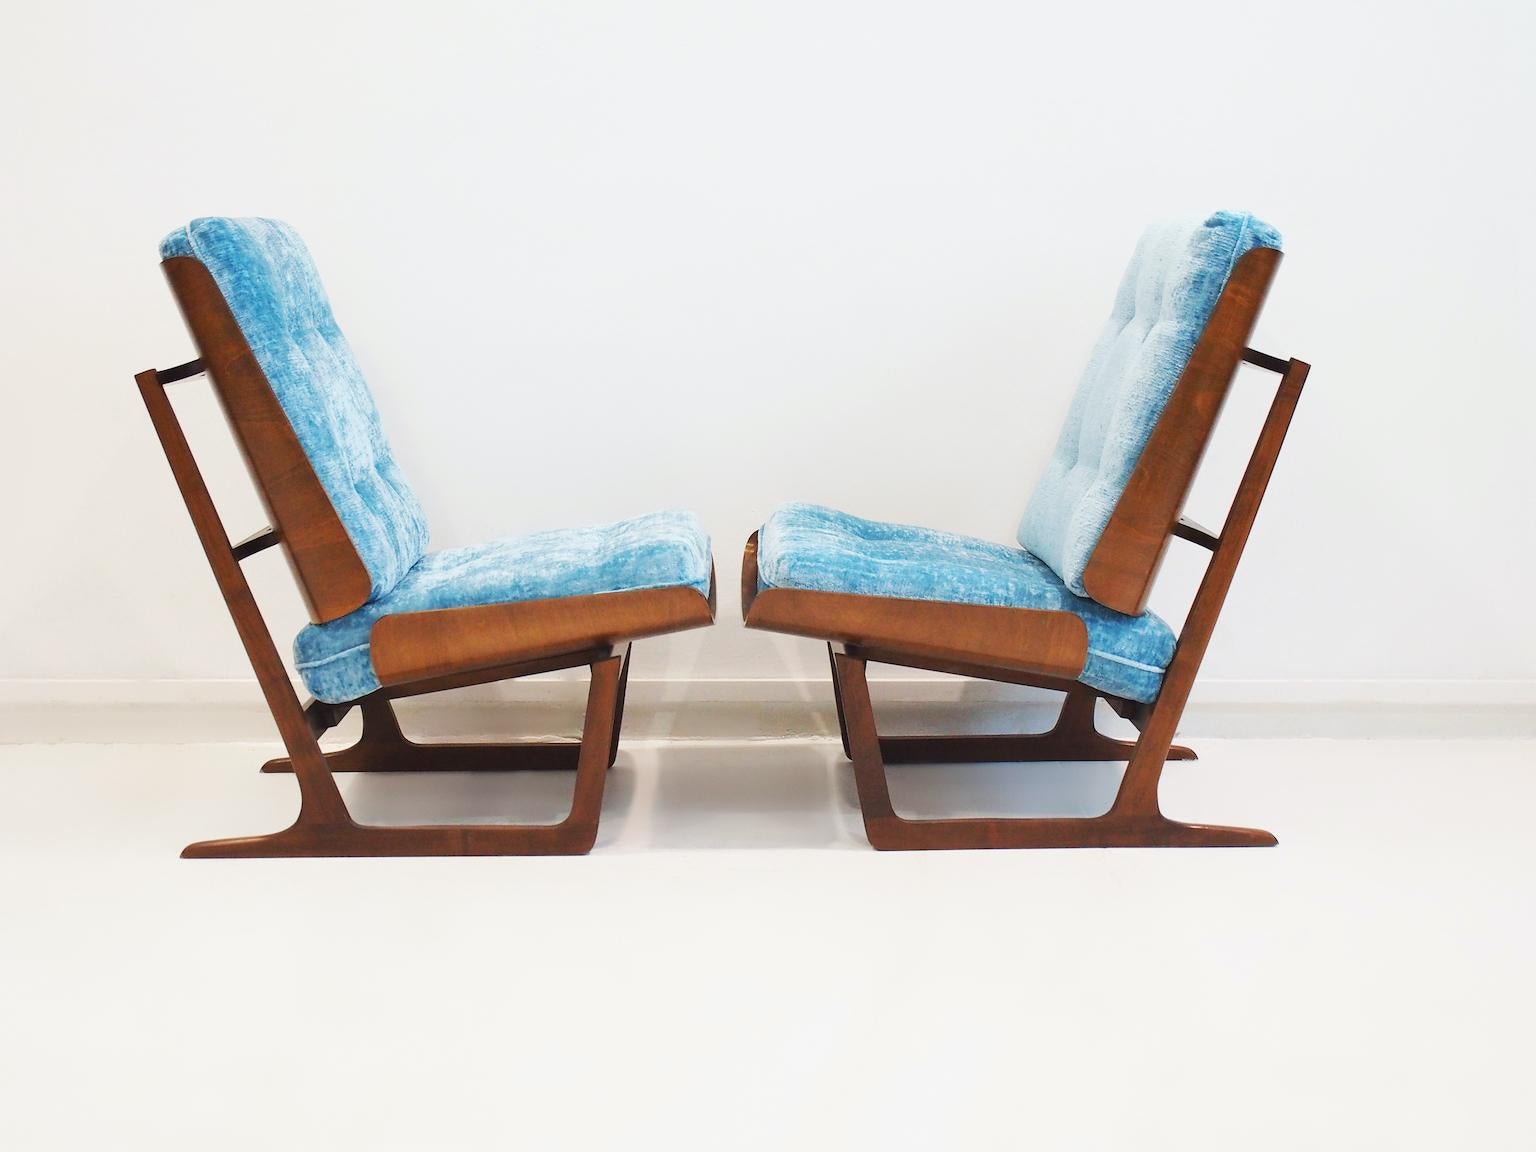 20th Century Pair of Wooden Lounge Chairs with Molded Plywood Backrest and Blue Upholstery For Sale